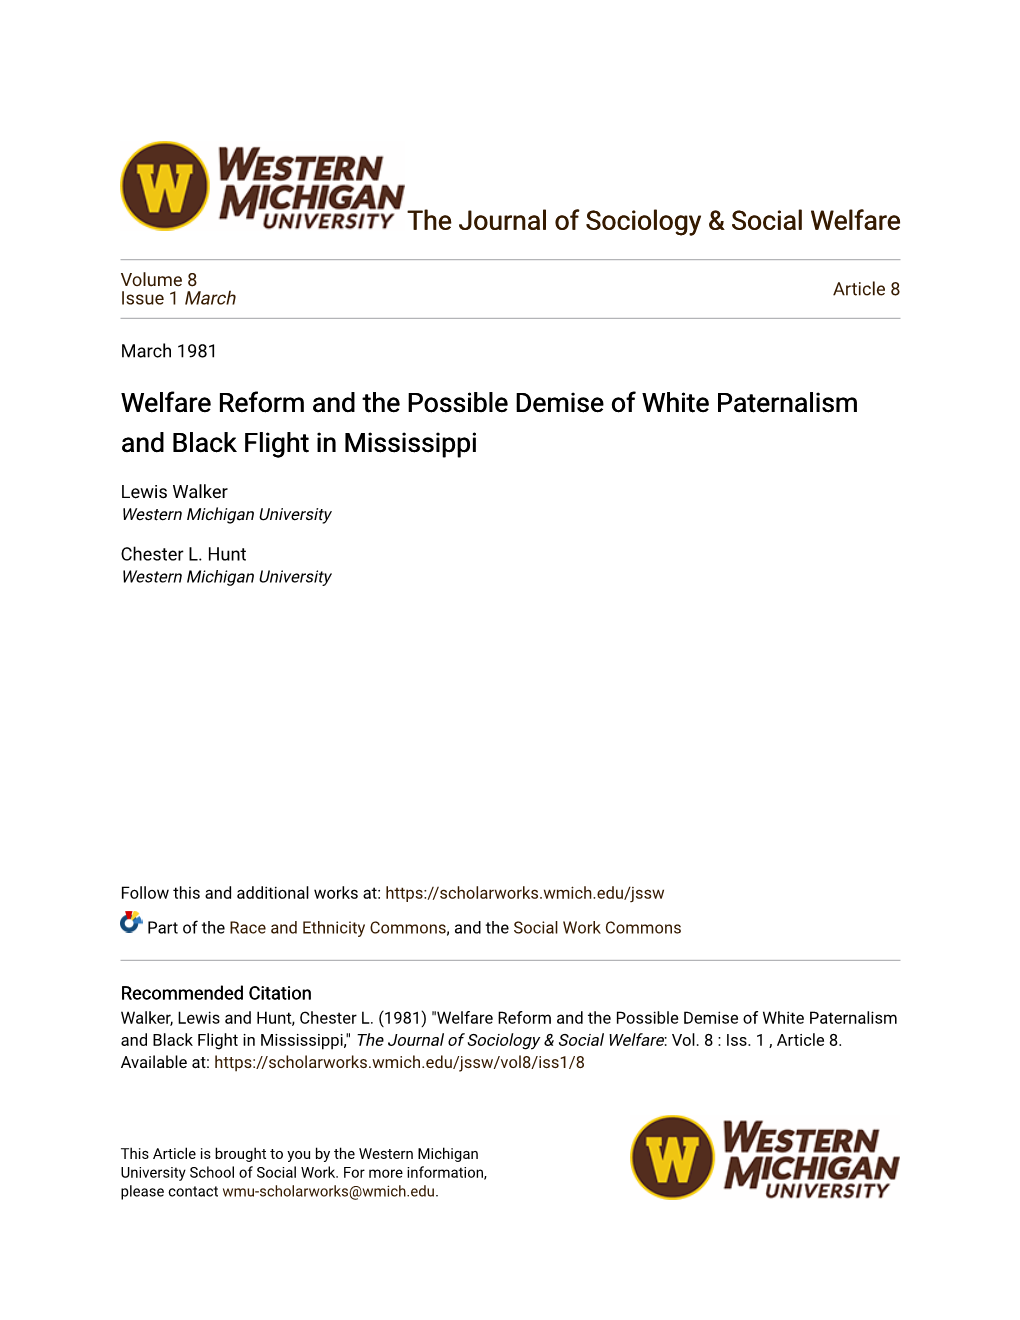 Welfare Reform and the Possible Demise of White Paternalism and Black Flight in Mississippi